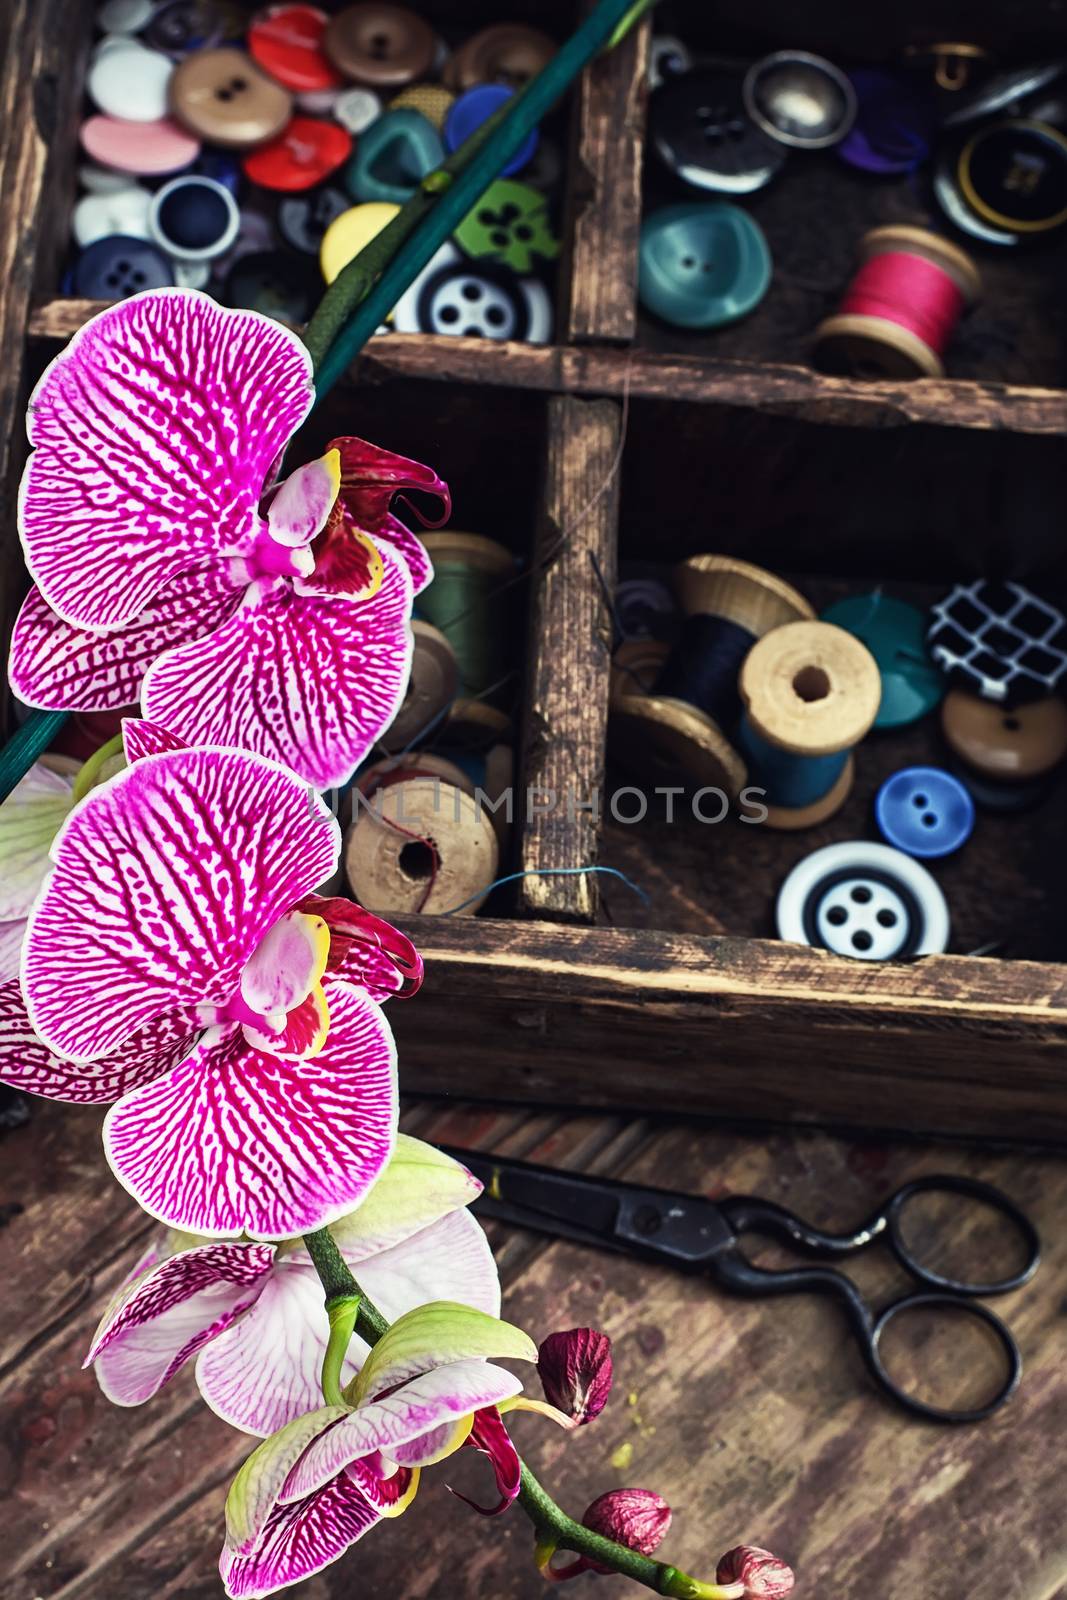 Sewing supplies and Orchid by LMykola